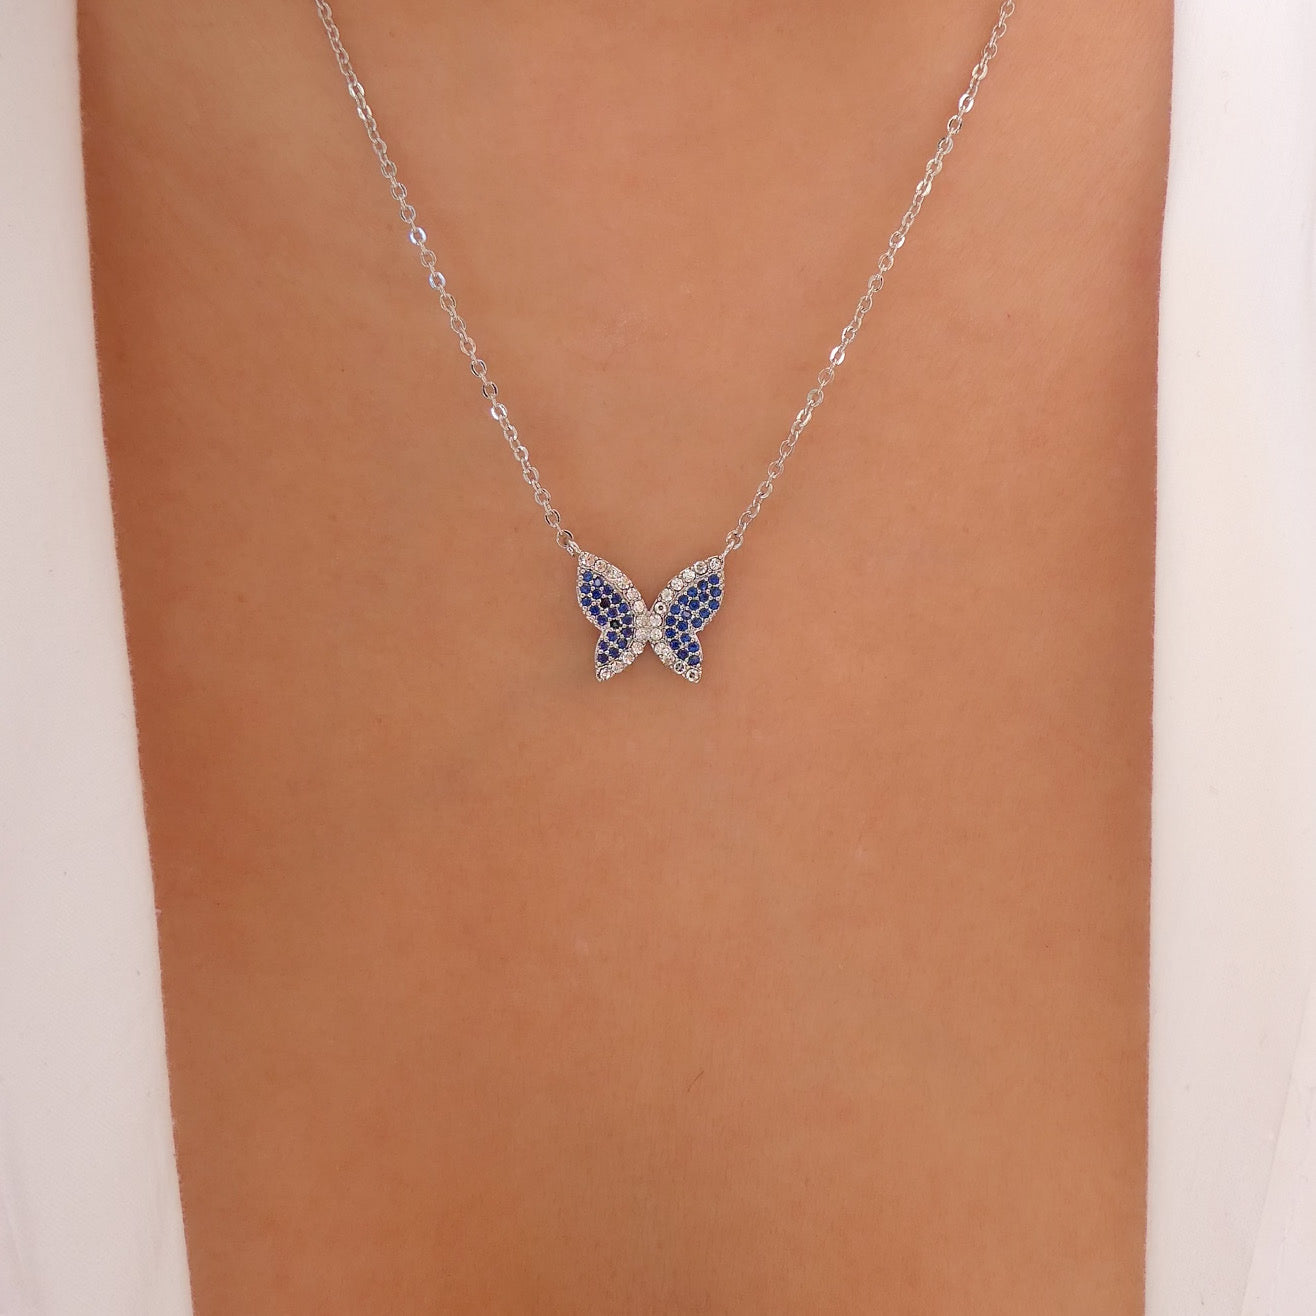 Silver Short Butterfly Charm Necklace – Feeling Pretty Sparkly LLC